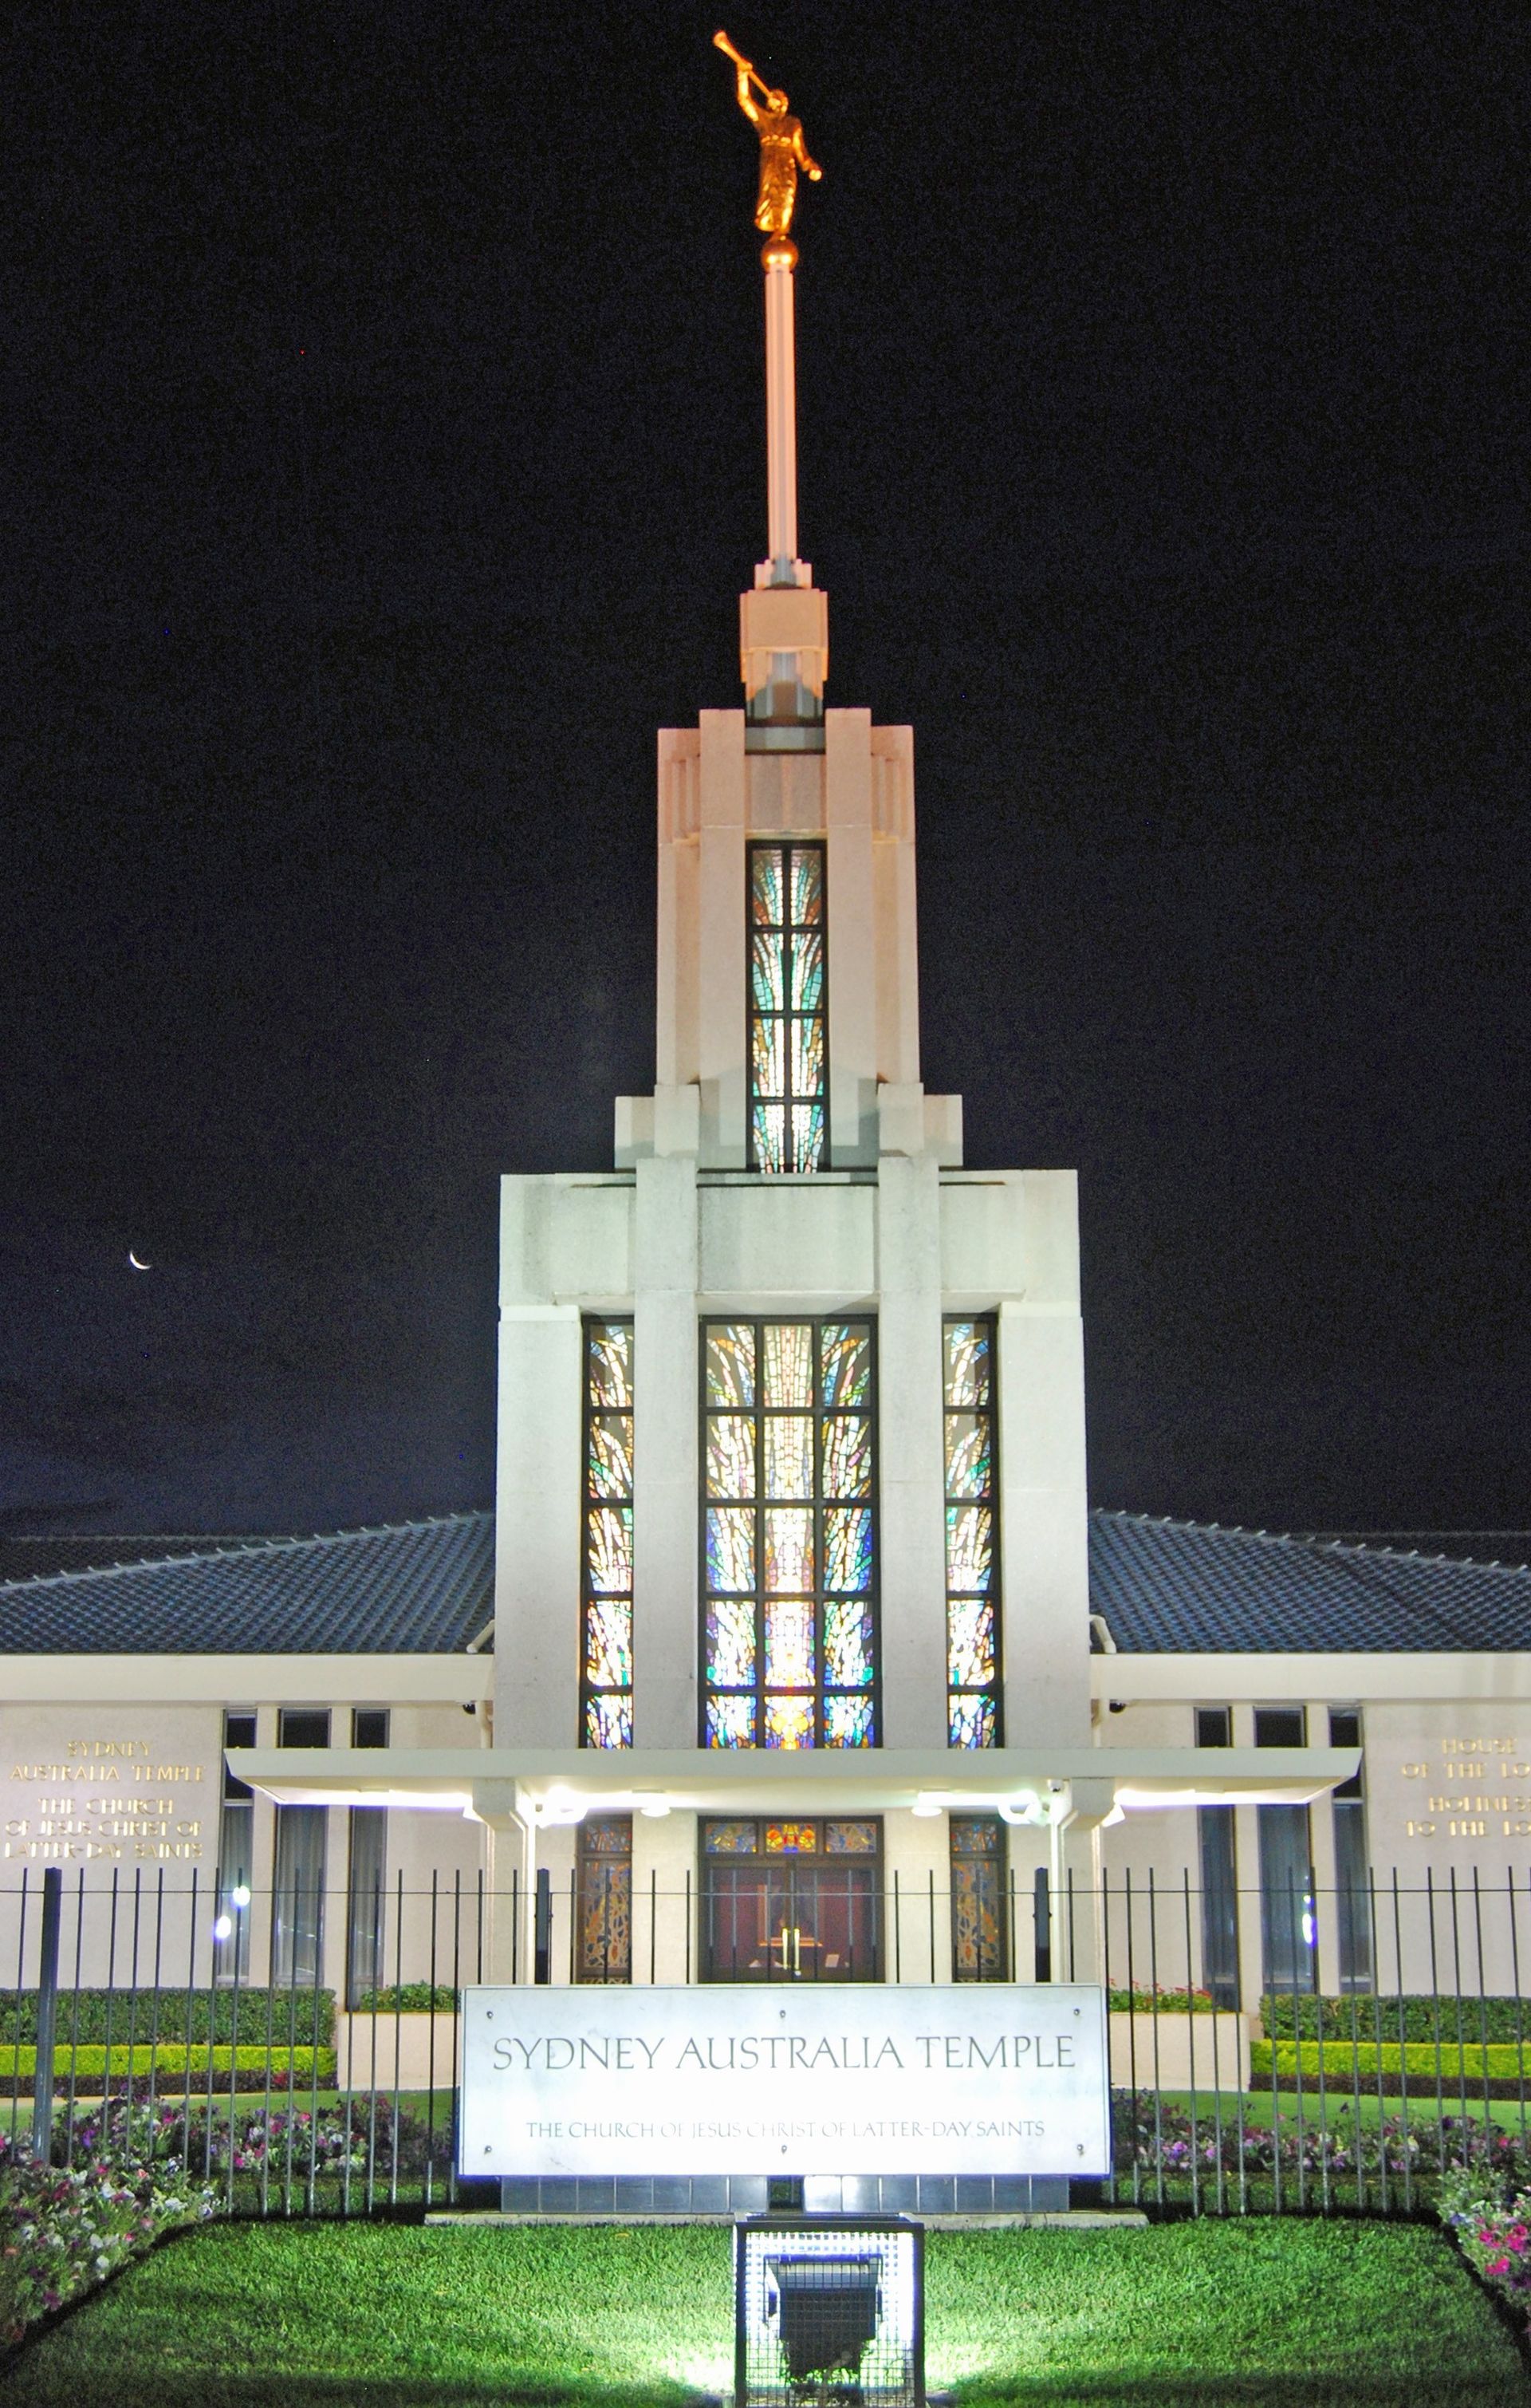 The Sydney Australia Temple, including the name sign, entrance, and scenery.  